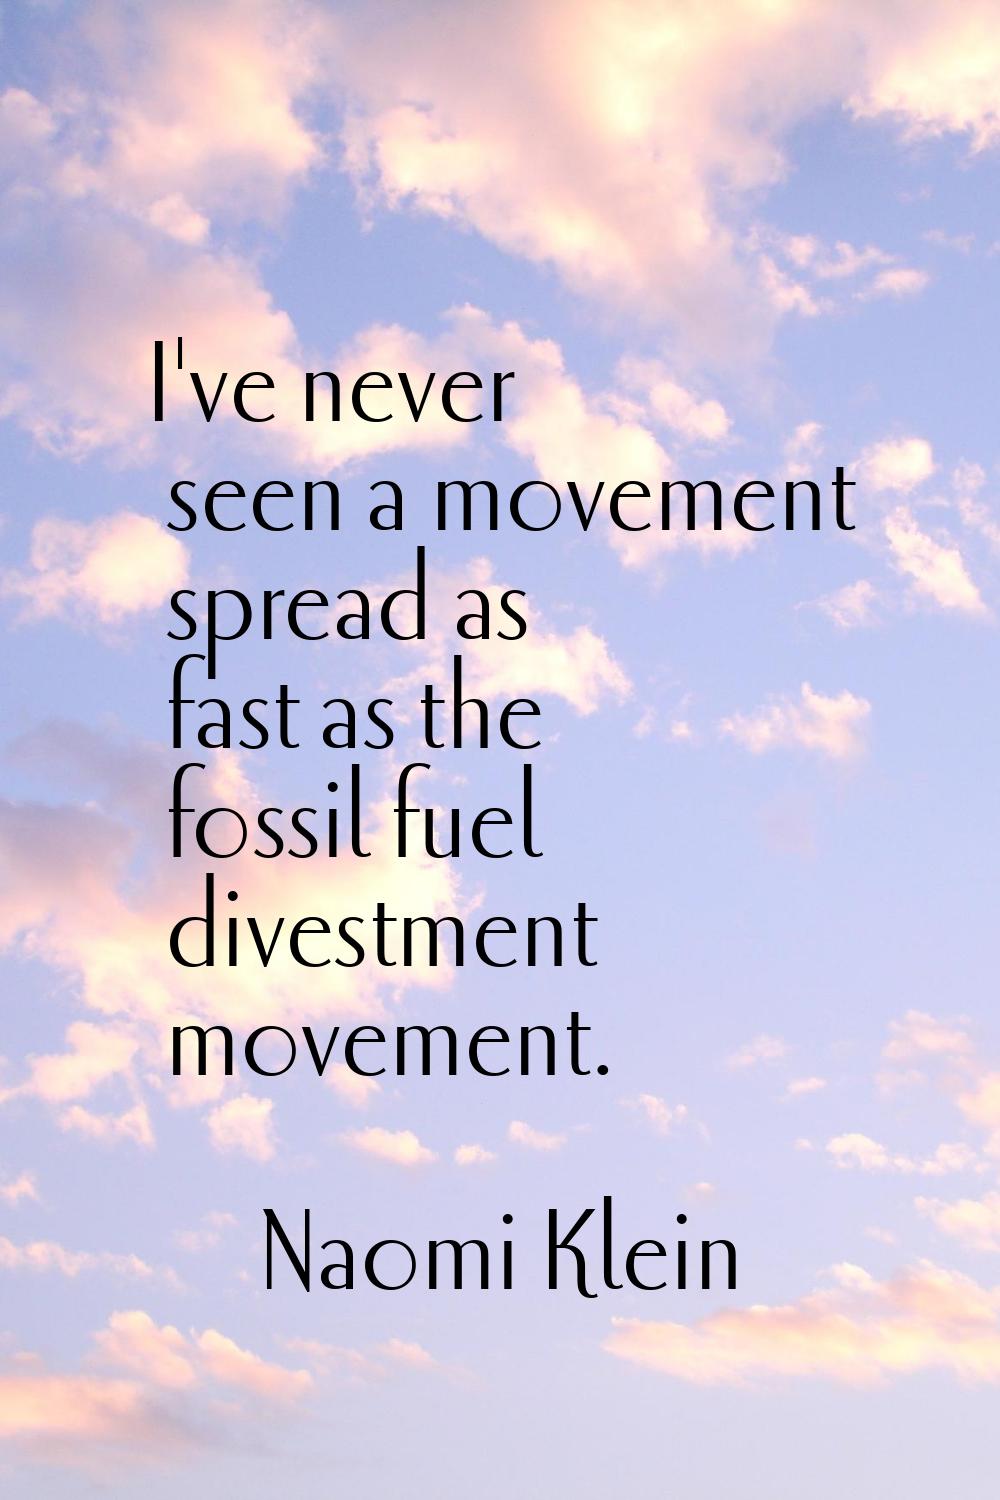 I've never seen a movement spread as fast as the fossil fuel divestment movement.